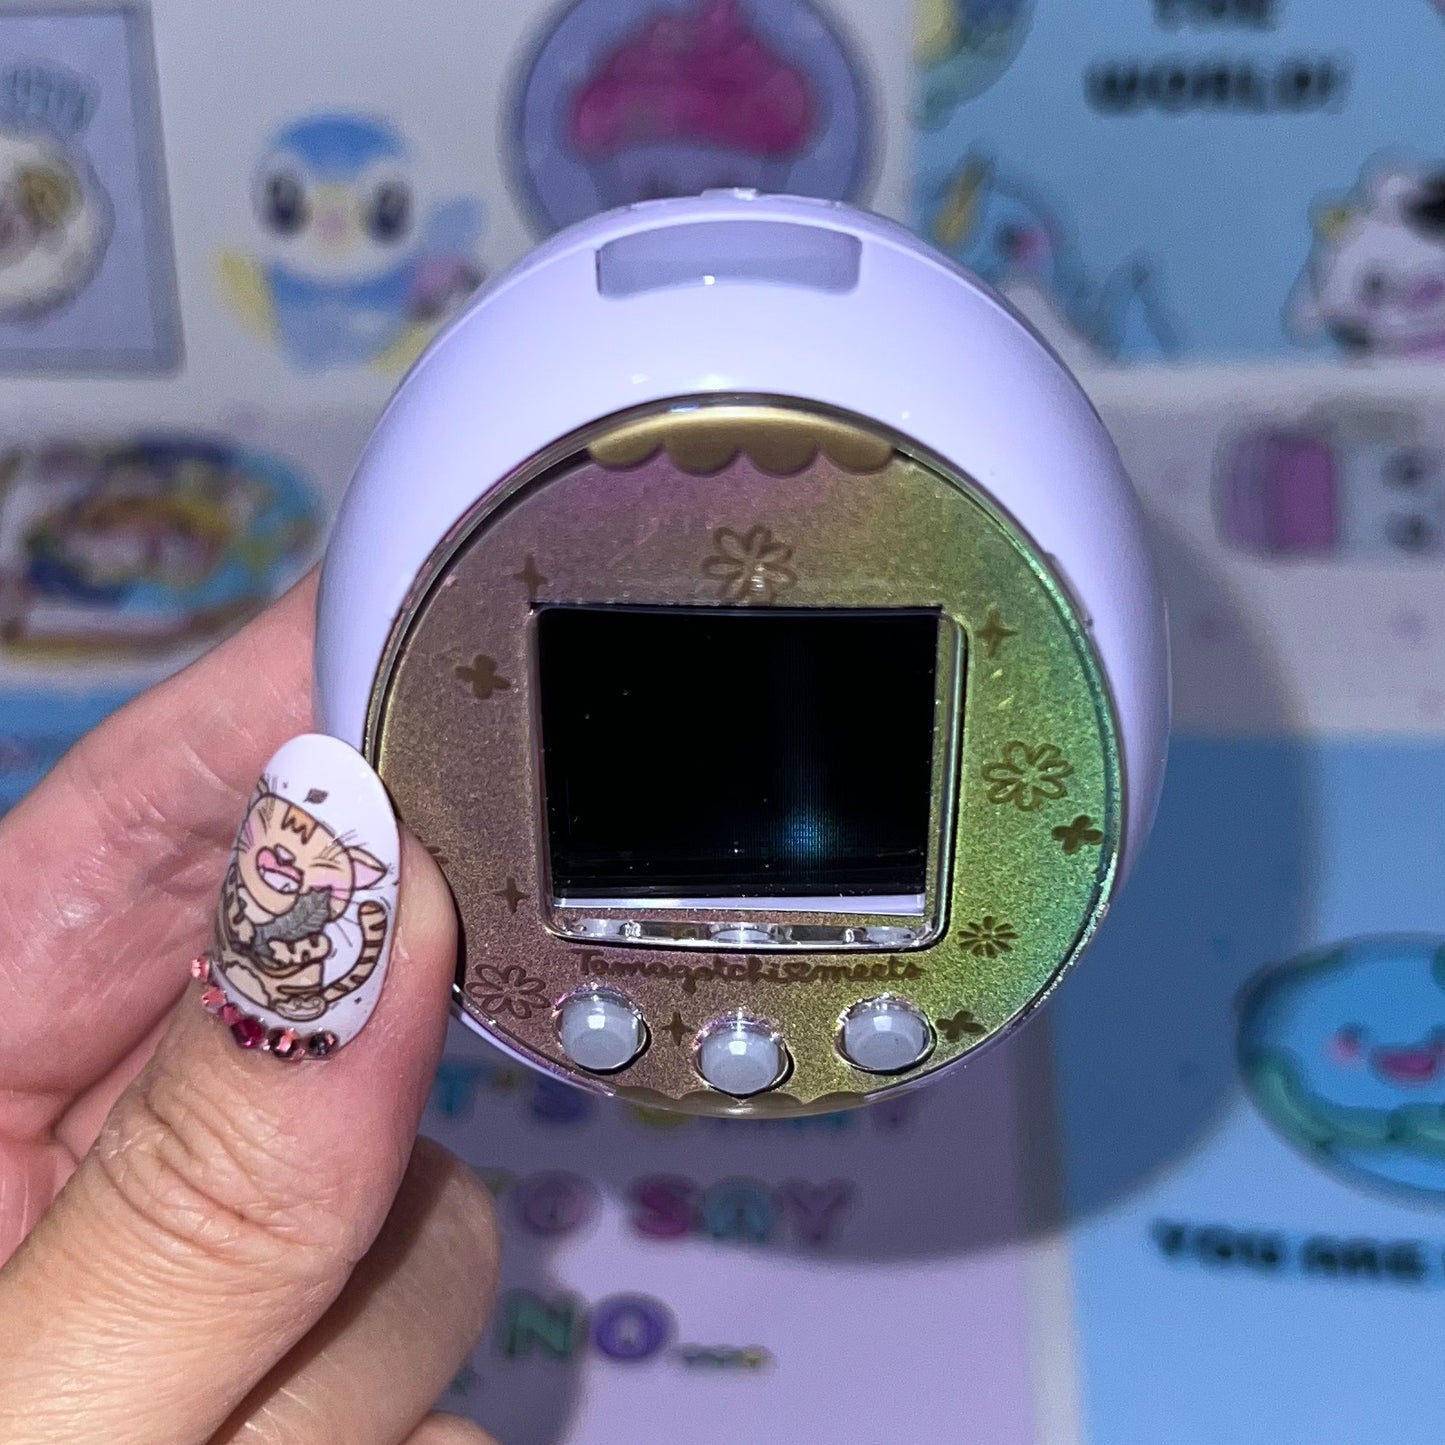 Tamagotchi Meets/ON/Ssome Reflective Holographic Faceplates